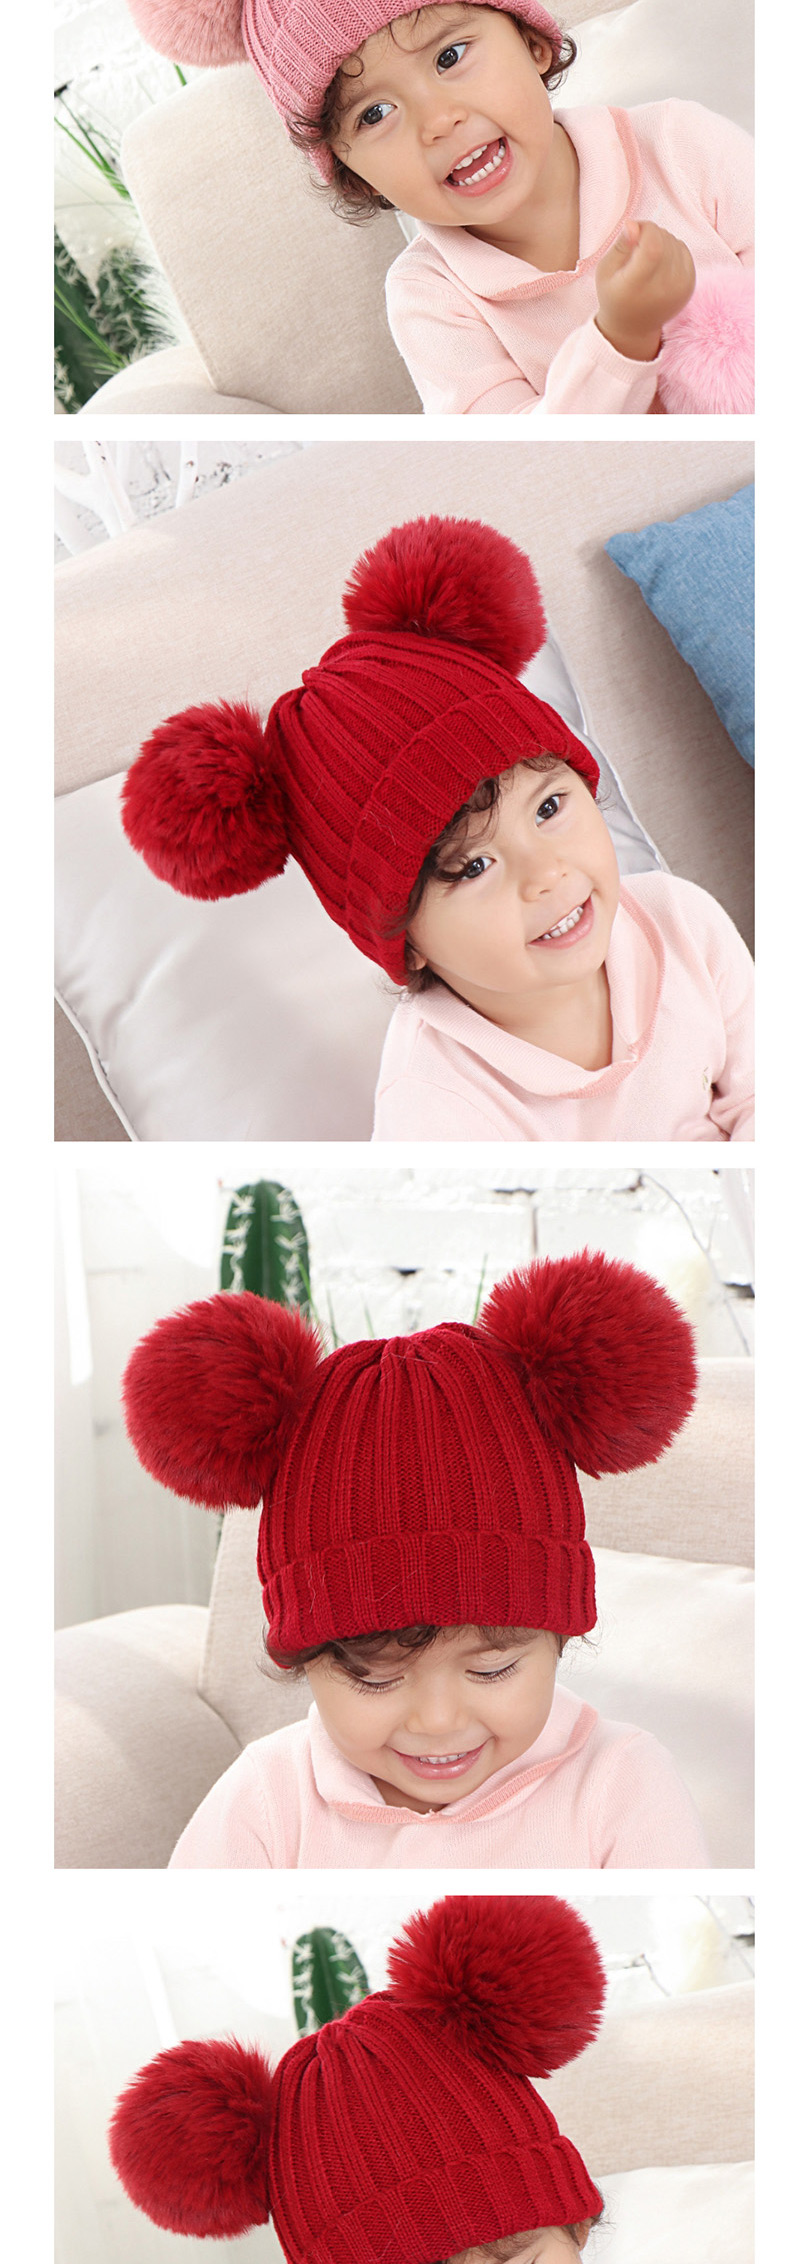 Fashion Beige Threaded Double-hair Ball Knitted Baby Hat,Children